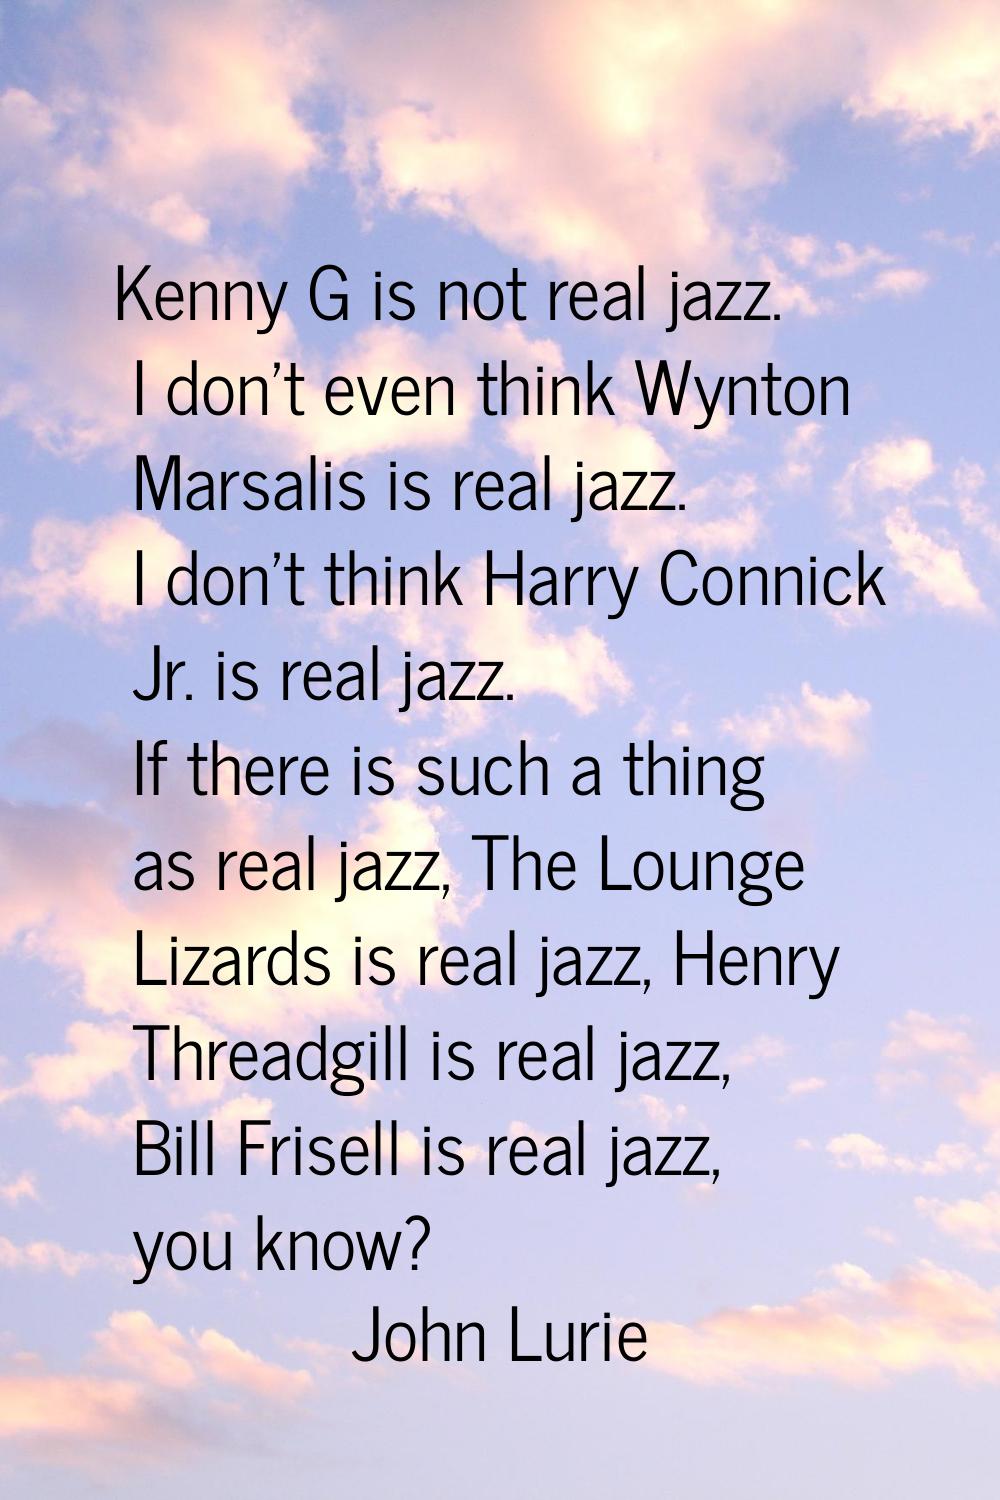 Kenny G is not real jazz. I don't even think Wynton Marsalis is real jazz. I don't think Harry Conn